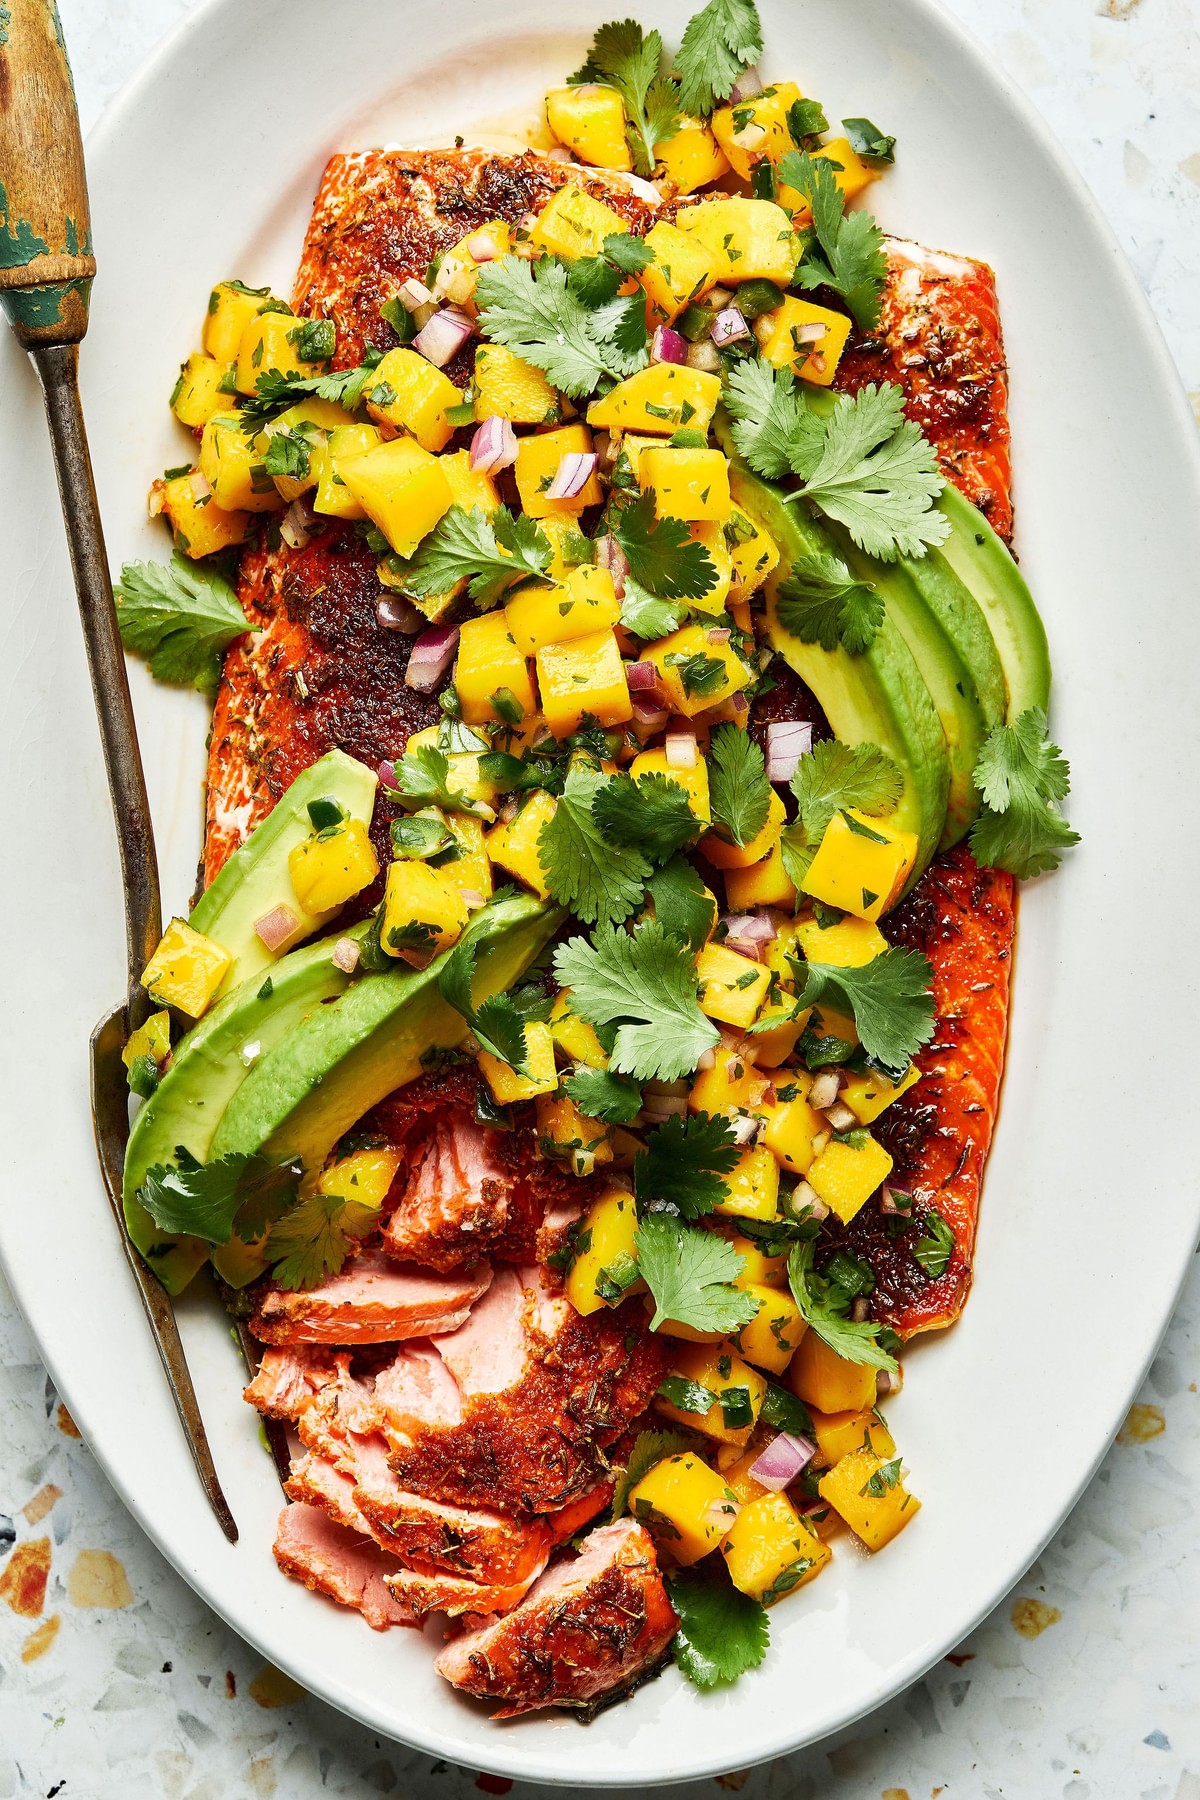 blackened salmon topped with homemade mango salsa and avocado on a serving plate with a serving fork